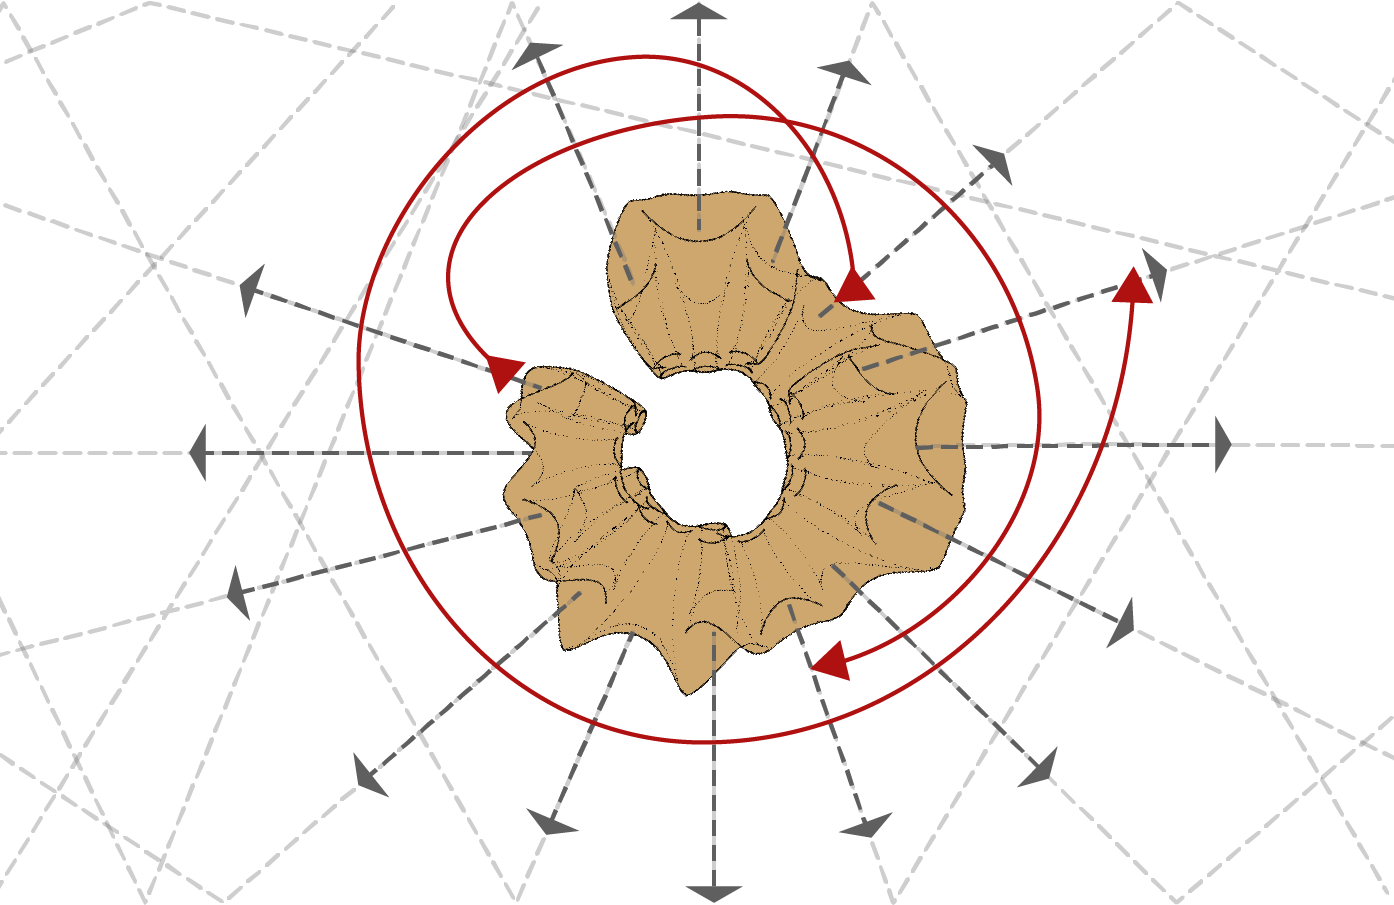 An illustration of how the sounds is projected to move in a spiral fashion around the sculpture.